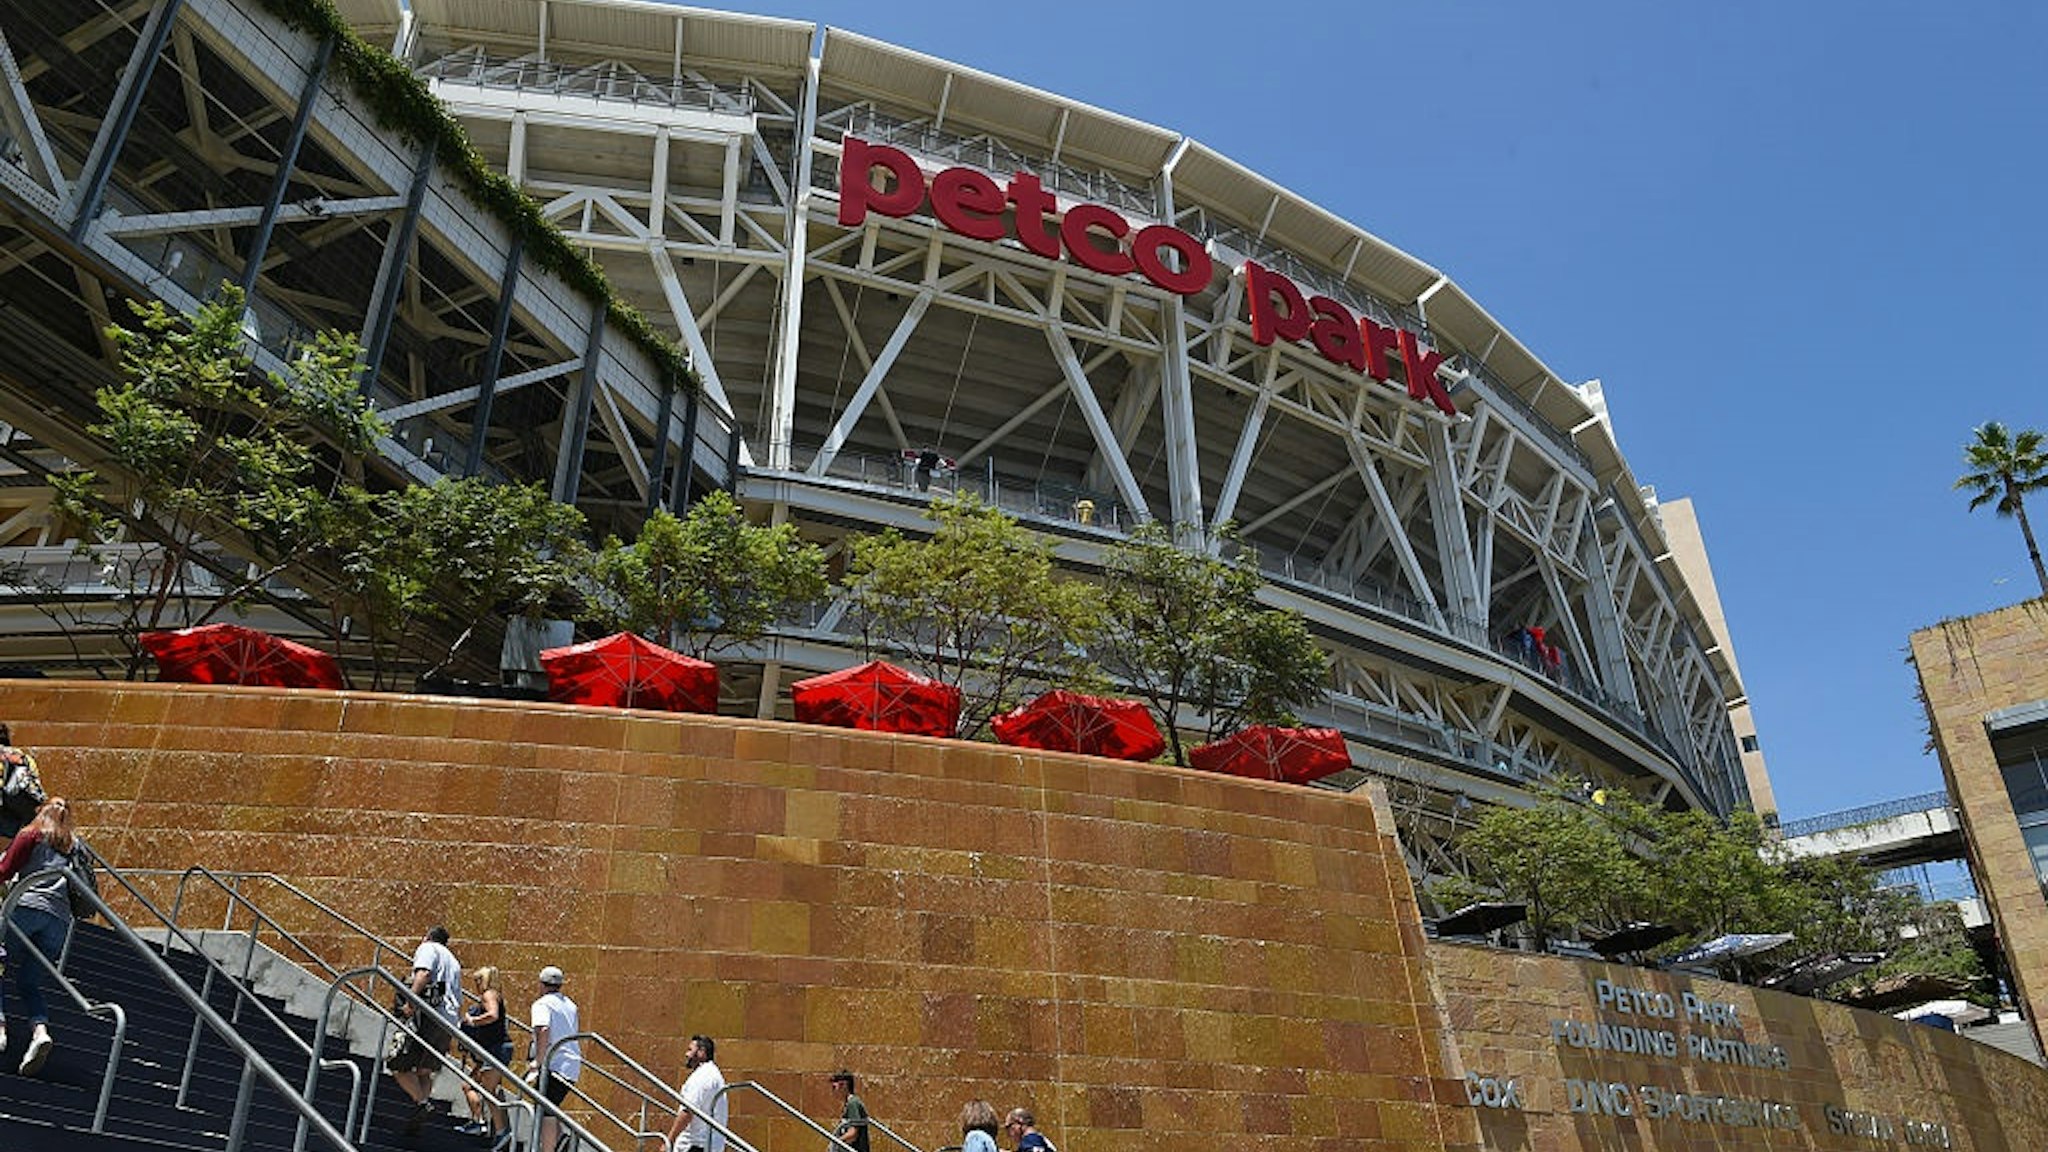 A general exterior view of the stadium as fans start to enter prior to the 2016 Major League Baseball All-Star Game at PETCO Park in San Diego, CA.